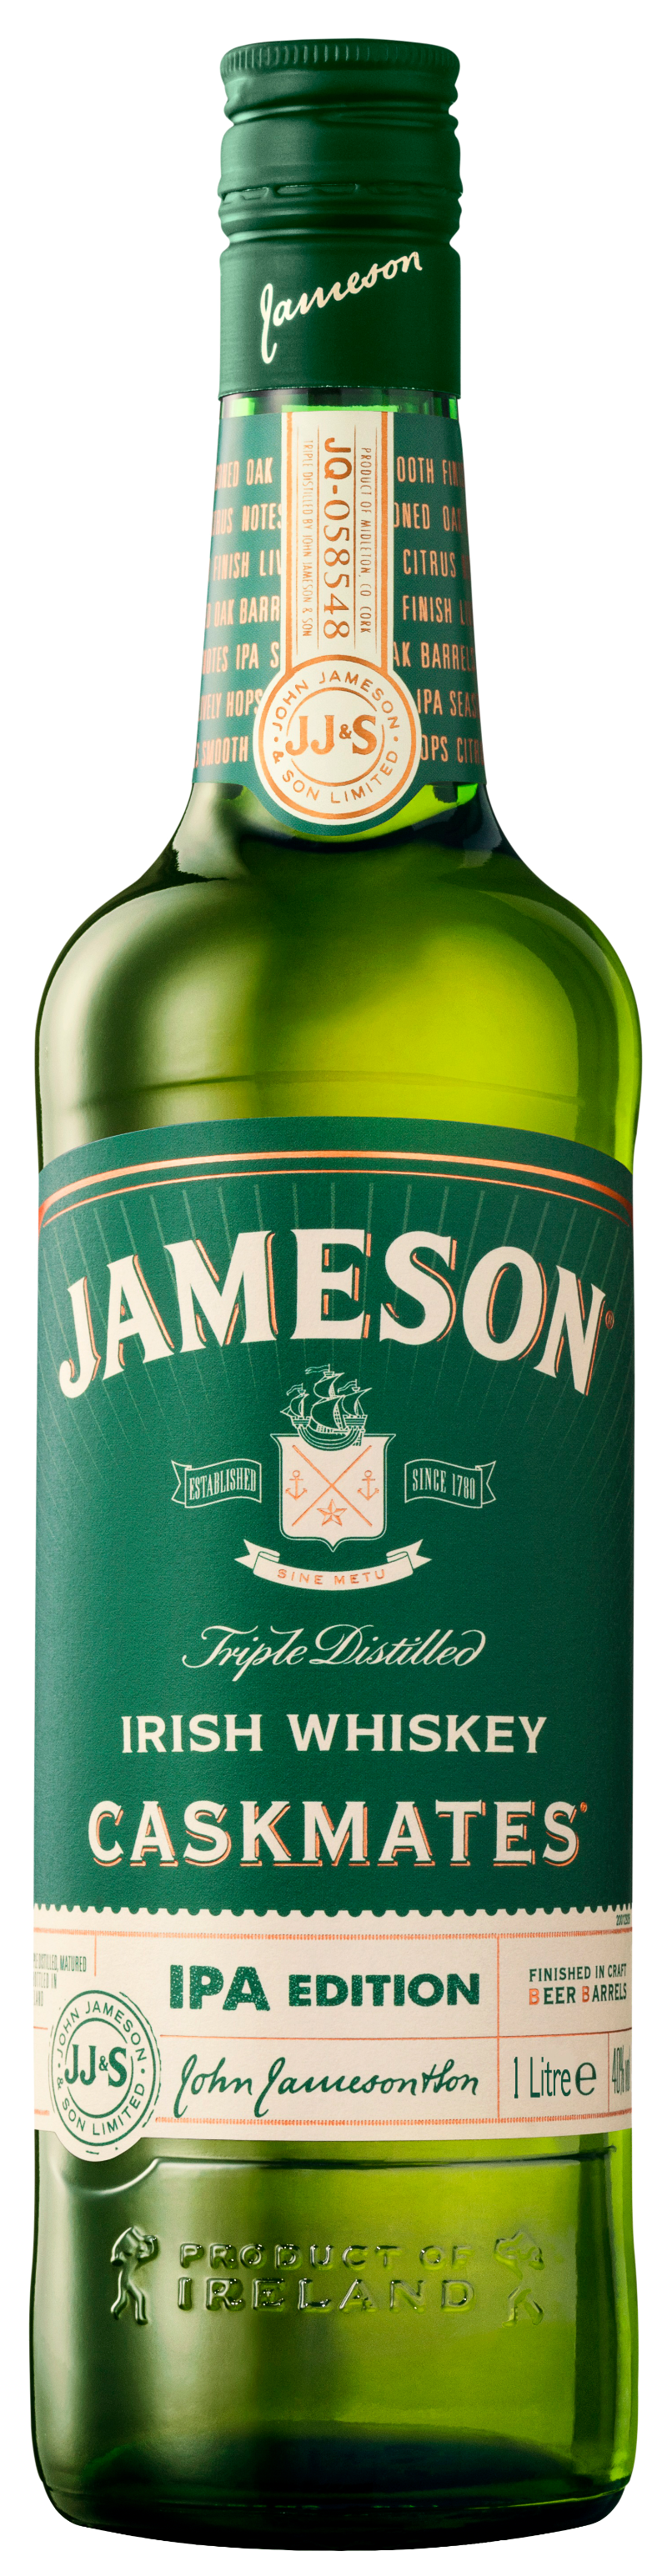 Jameson - Caskmates IPA Edition 100 cl 40% vol | Whisky